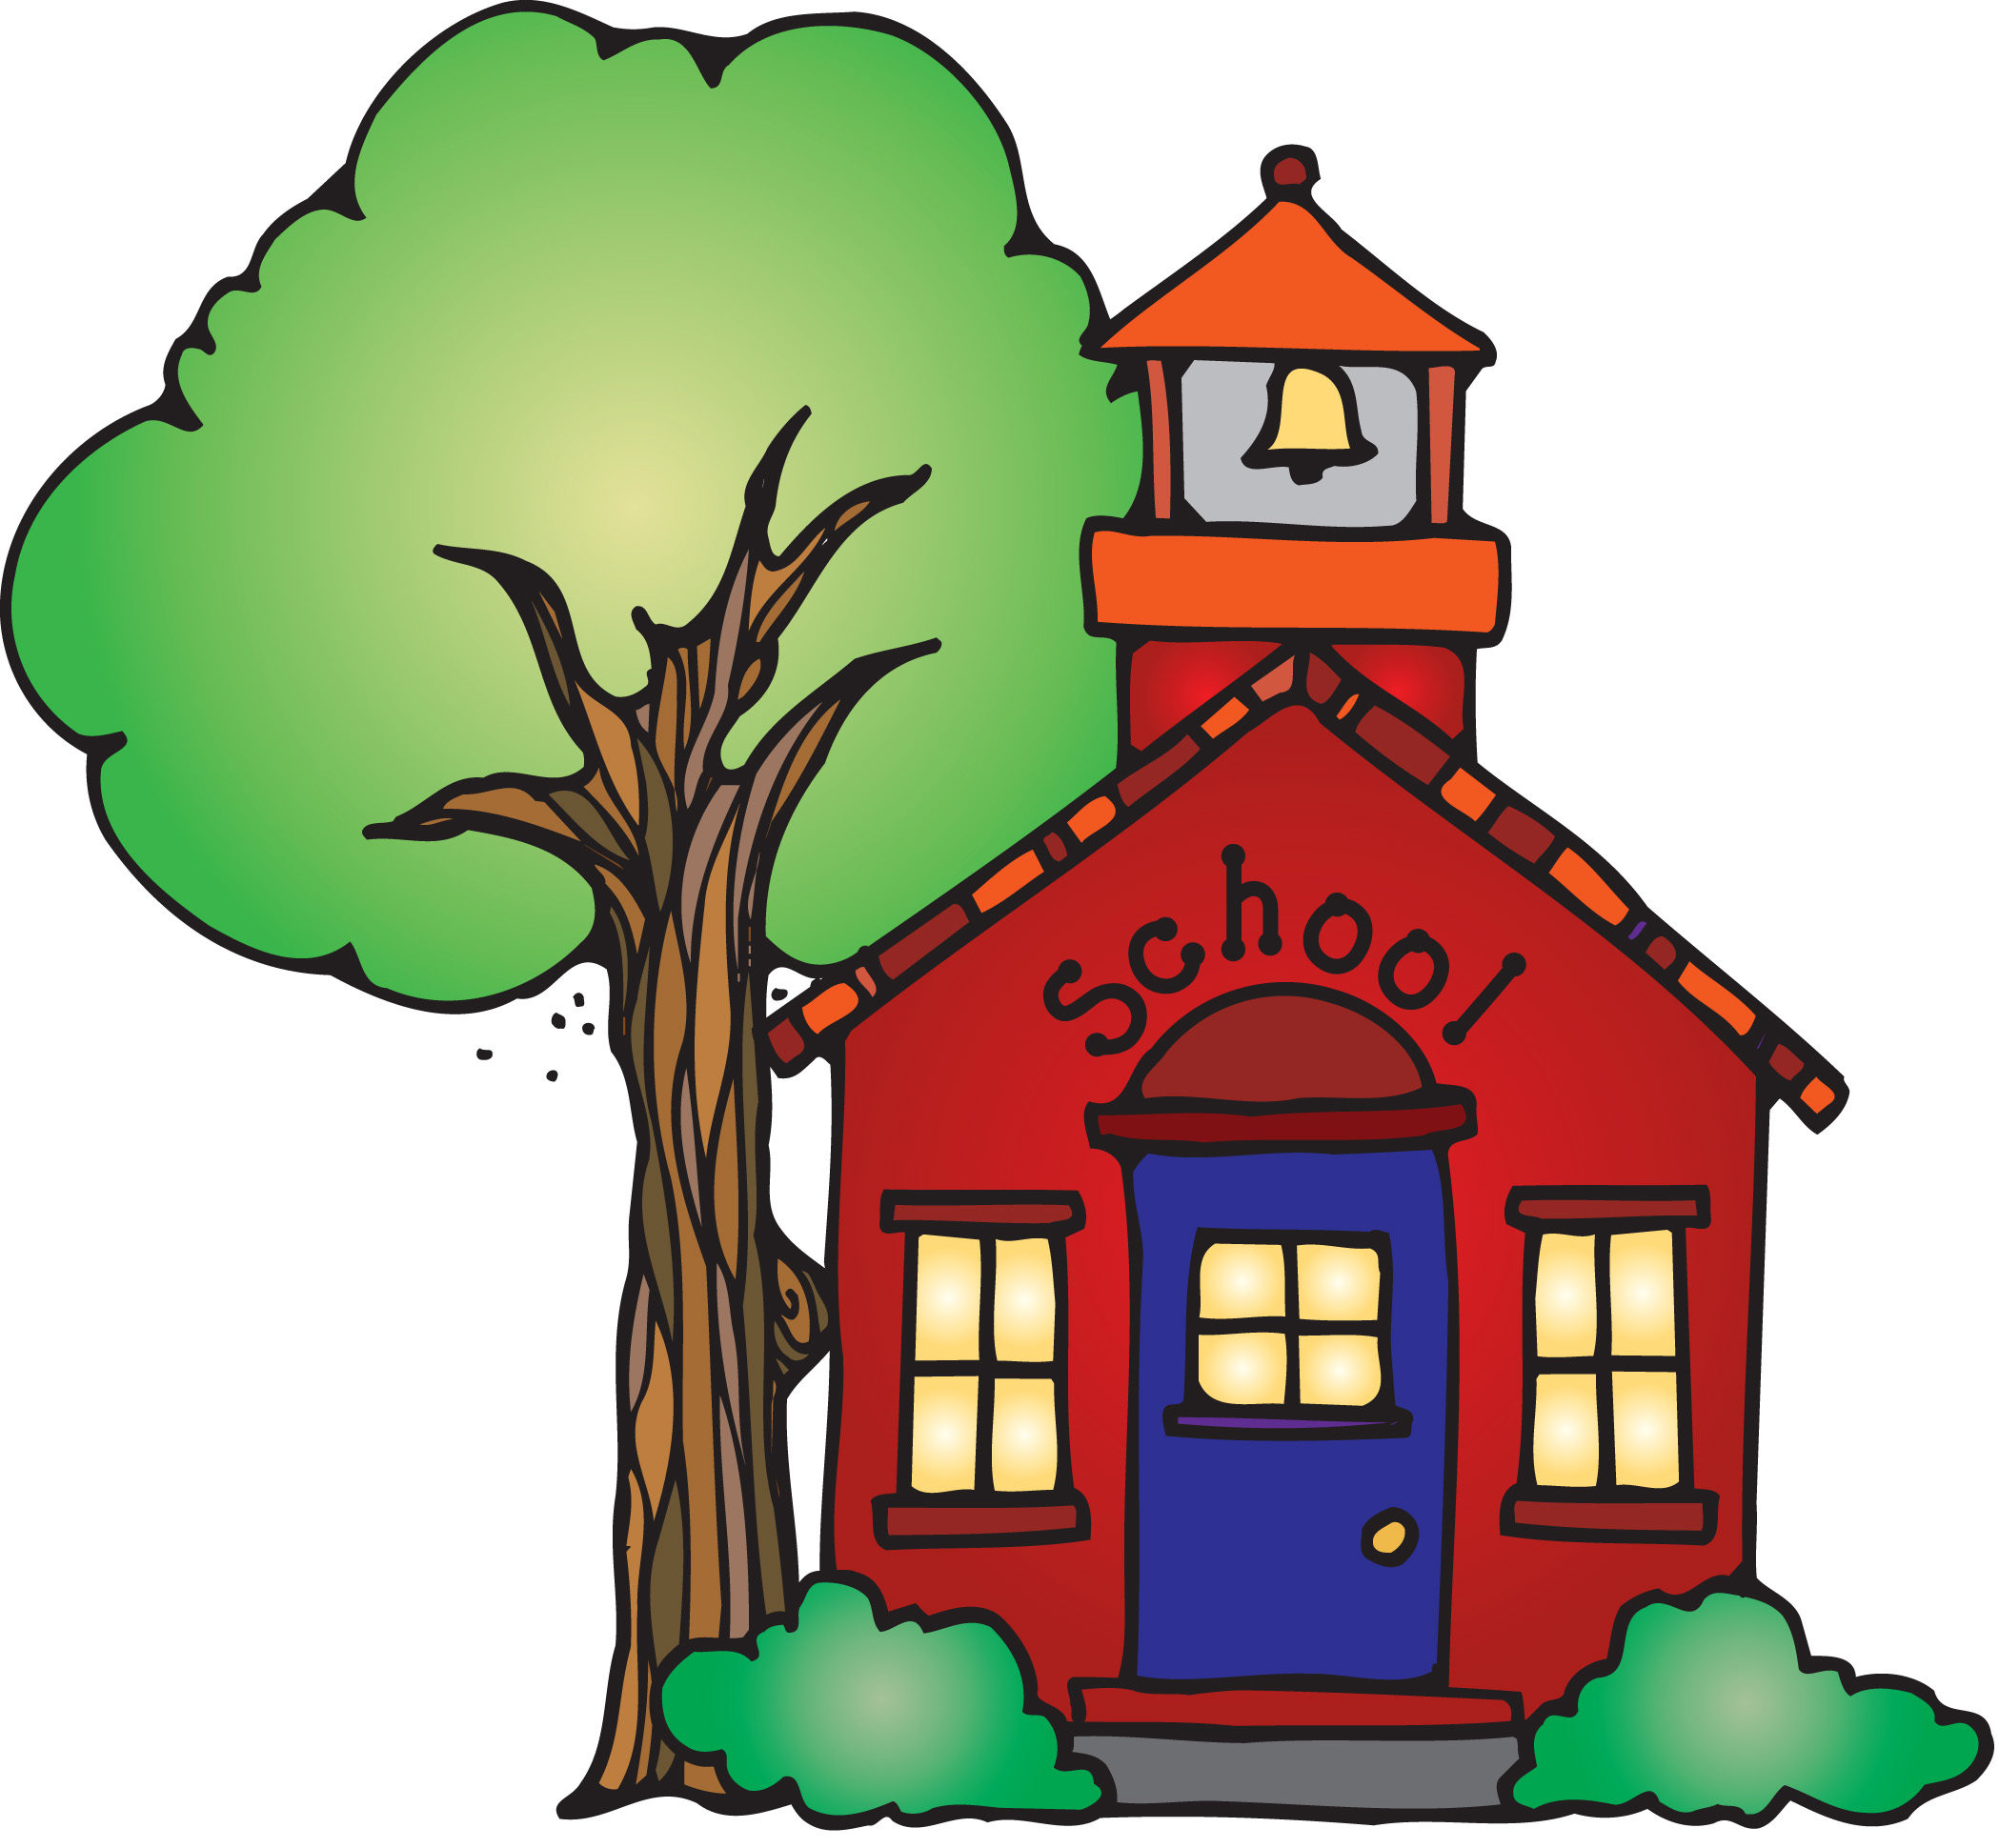 Elementary School Building | Clipart Panda - Free Clipart Images